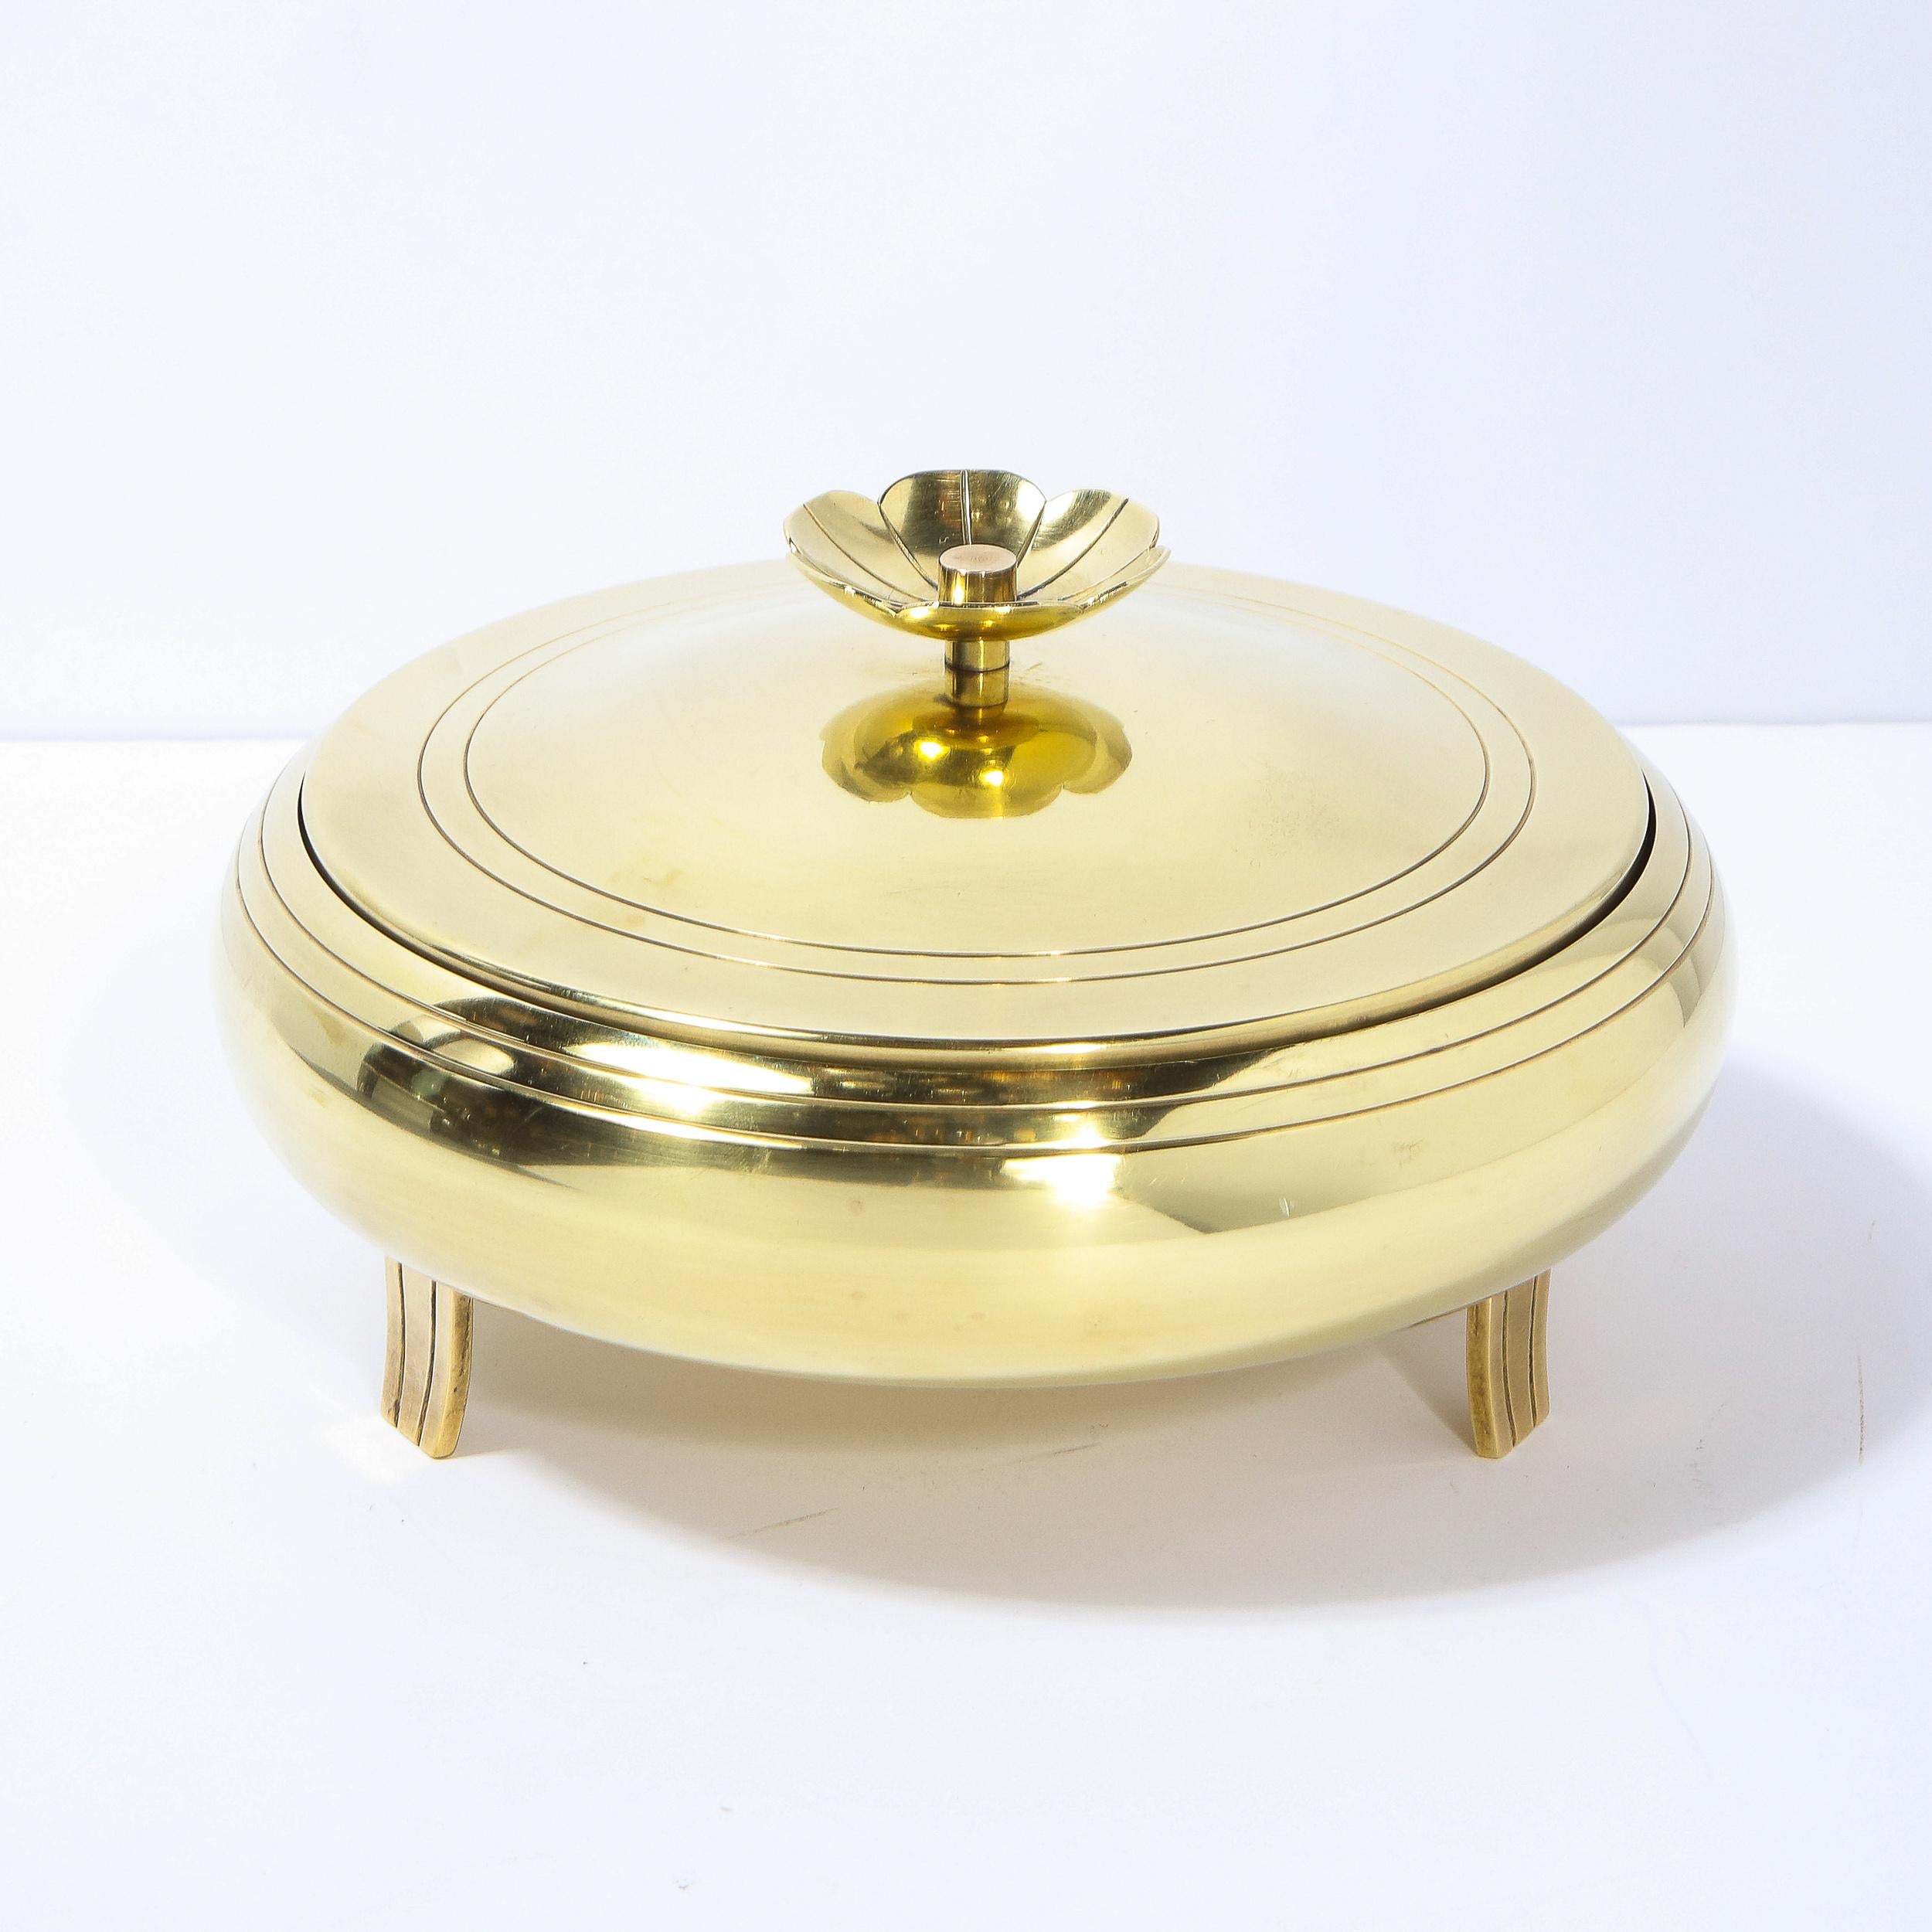 Polished Mid-Century Modern Footed Brass Bowl by Tommi Parzinger for Dorlyn Silversmiths